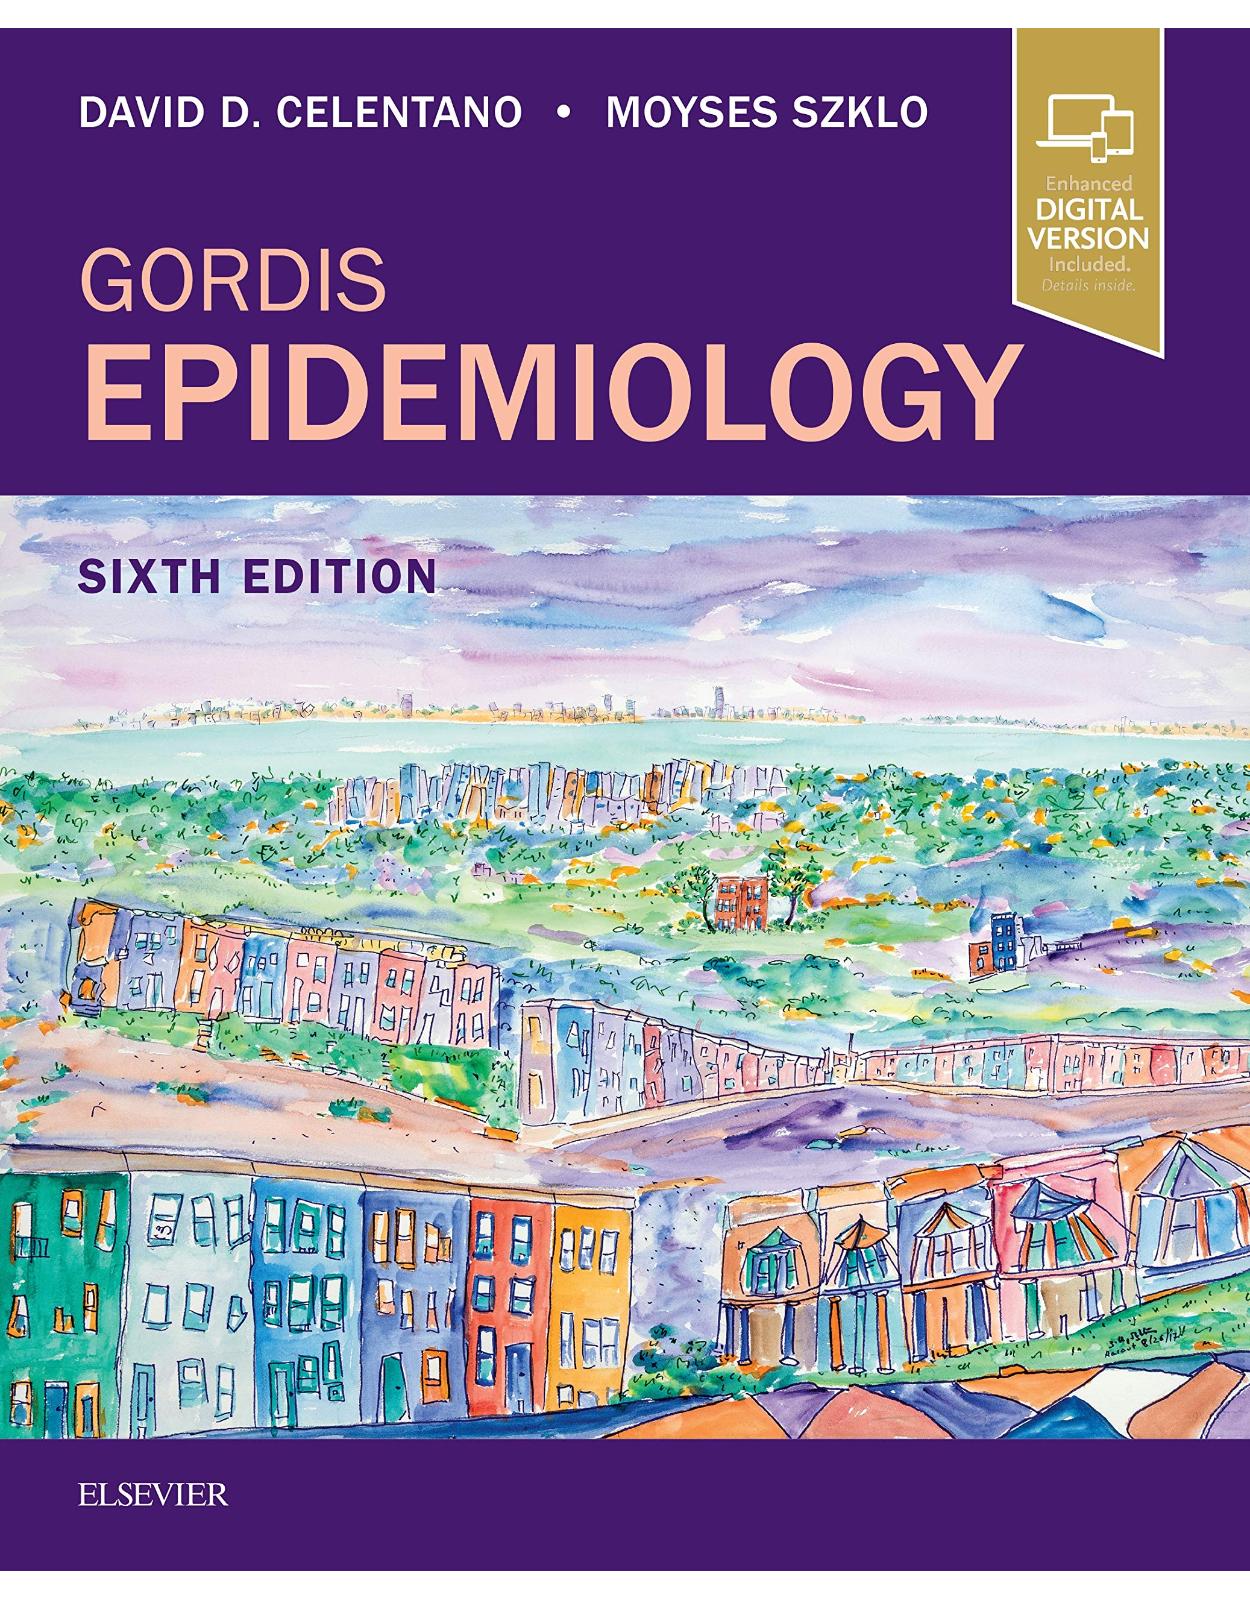 Gordis Epidemiology, 6e: with STUDENT CONSULT Online Access